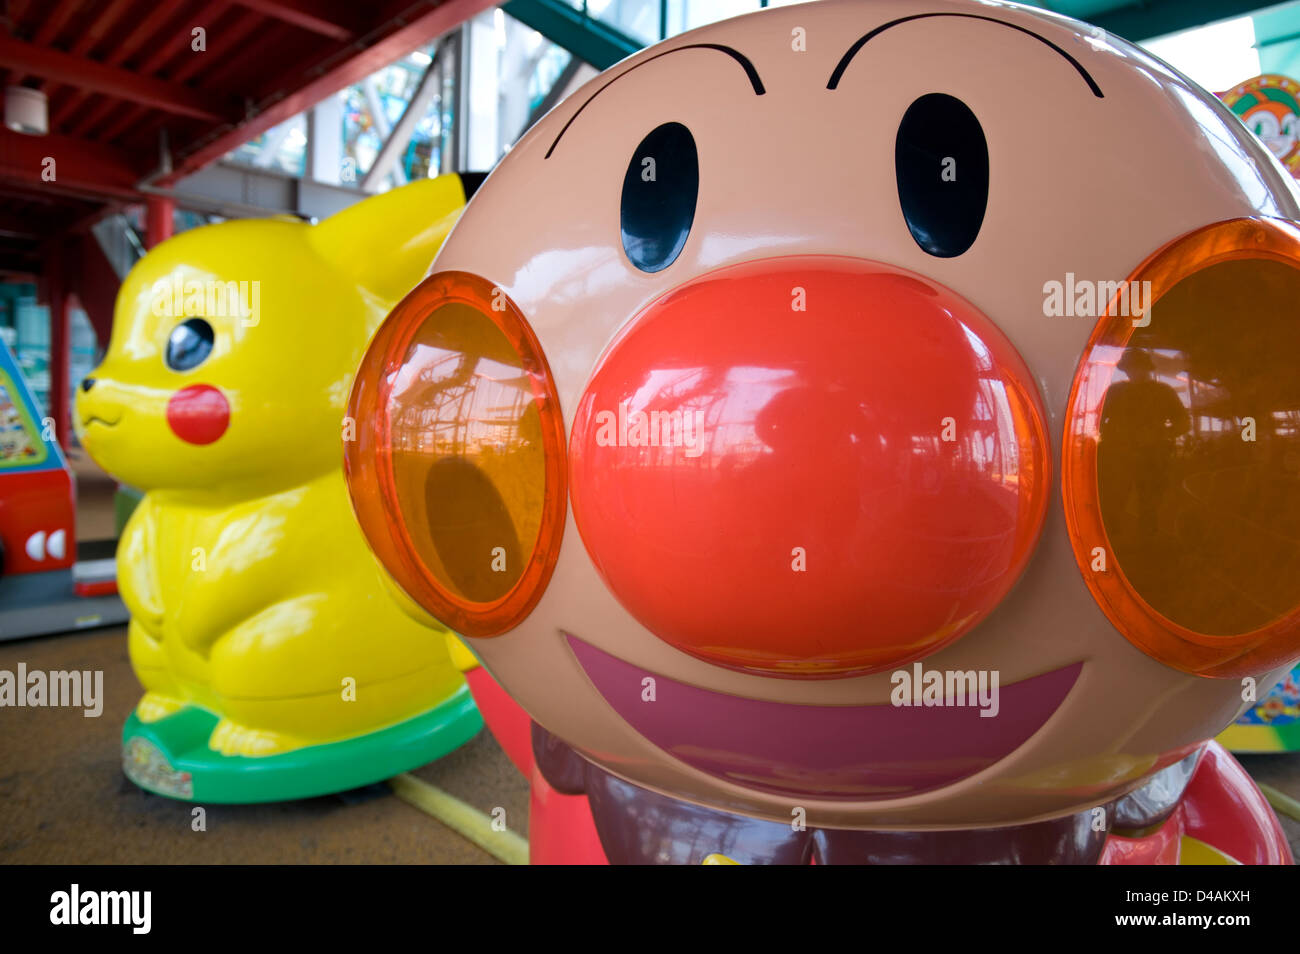 Wildly famous Anpanman and Pikachu animation characters of Japanese pop culture. Stock Photo